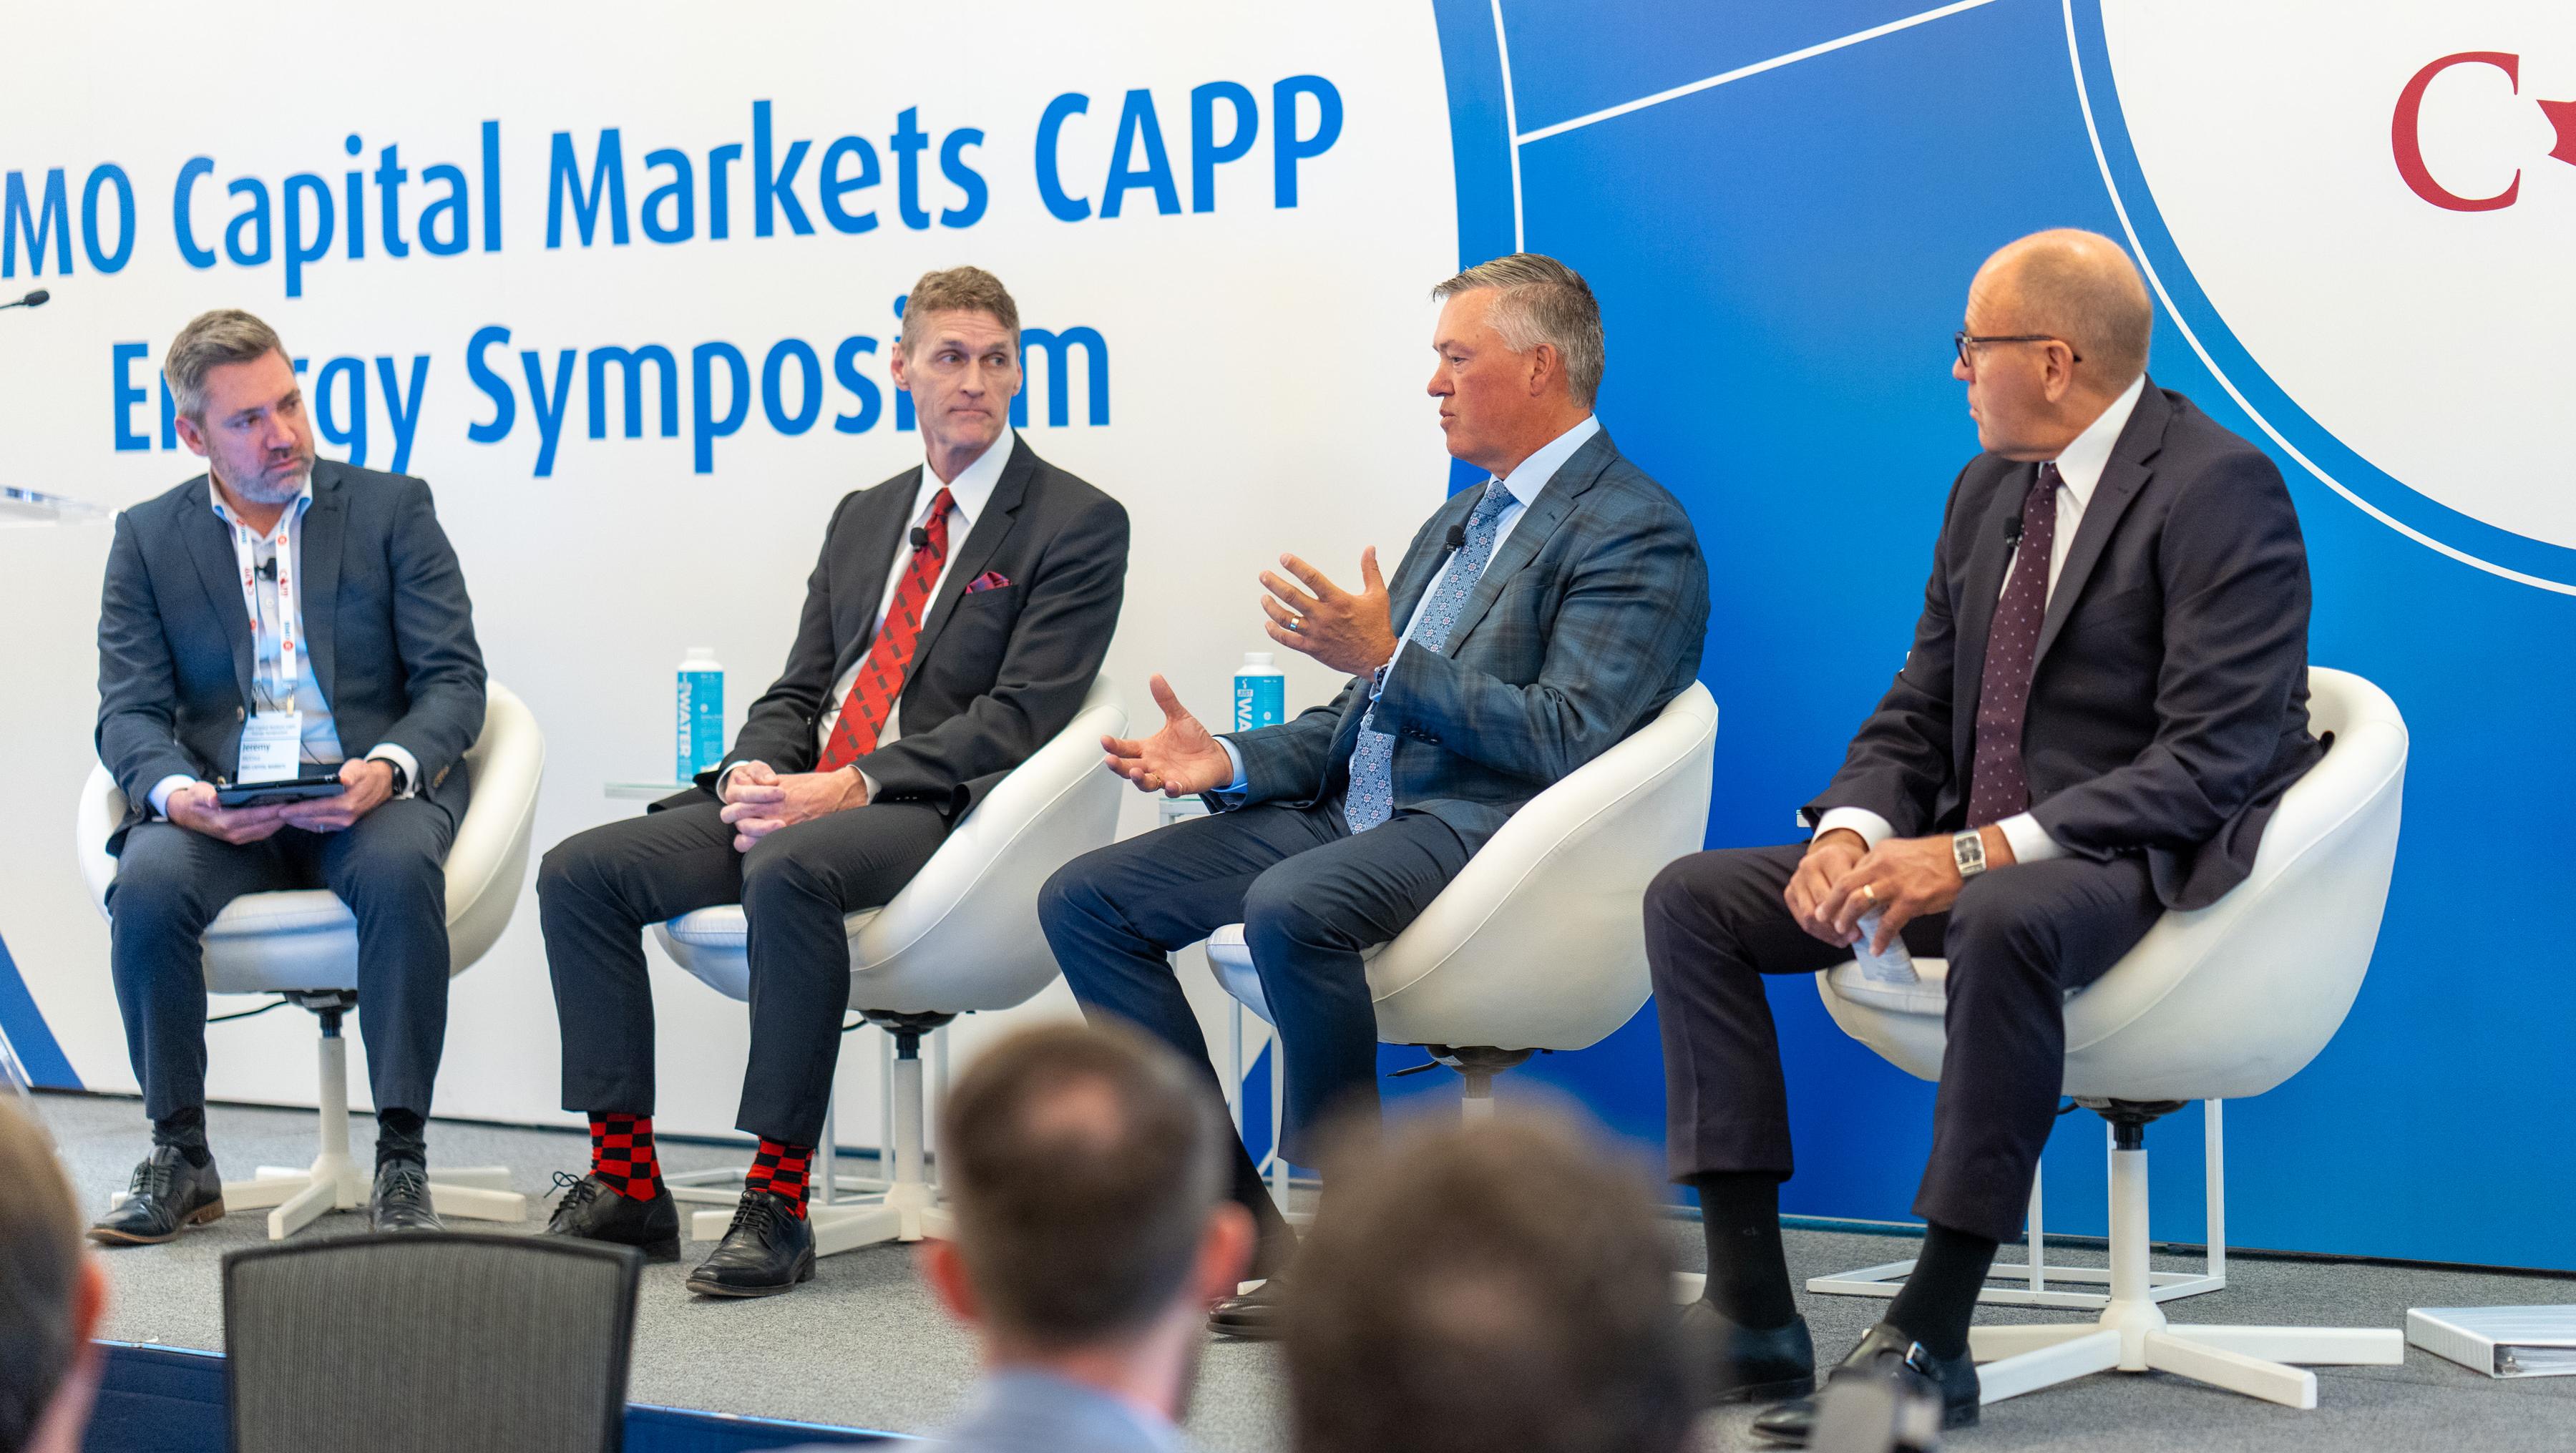 Panelists at the CAPP Energy Symposium